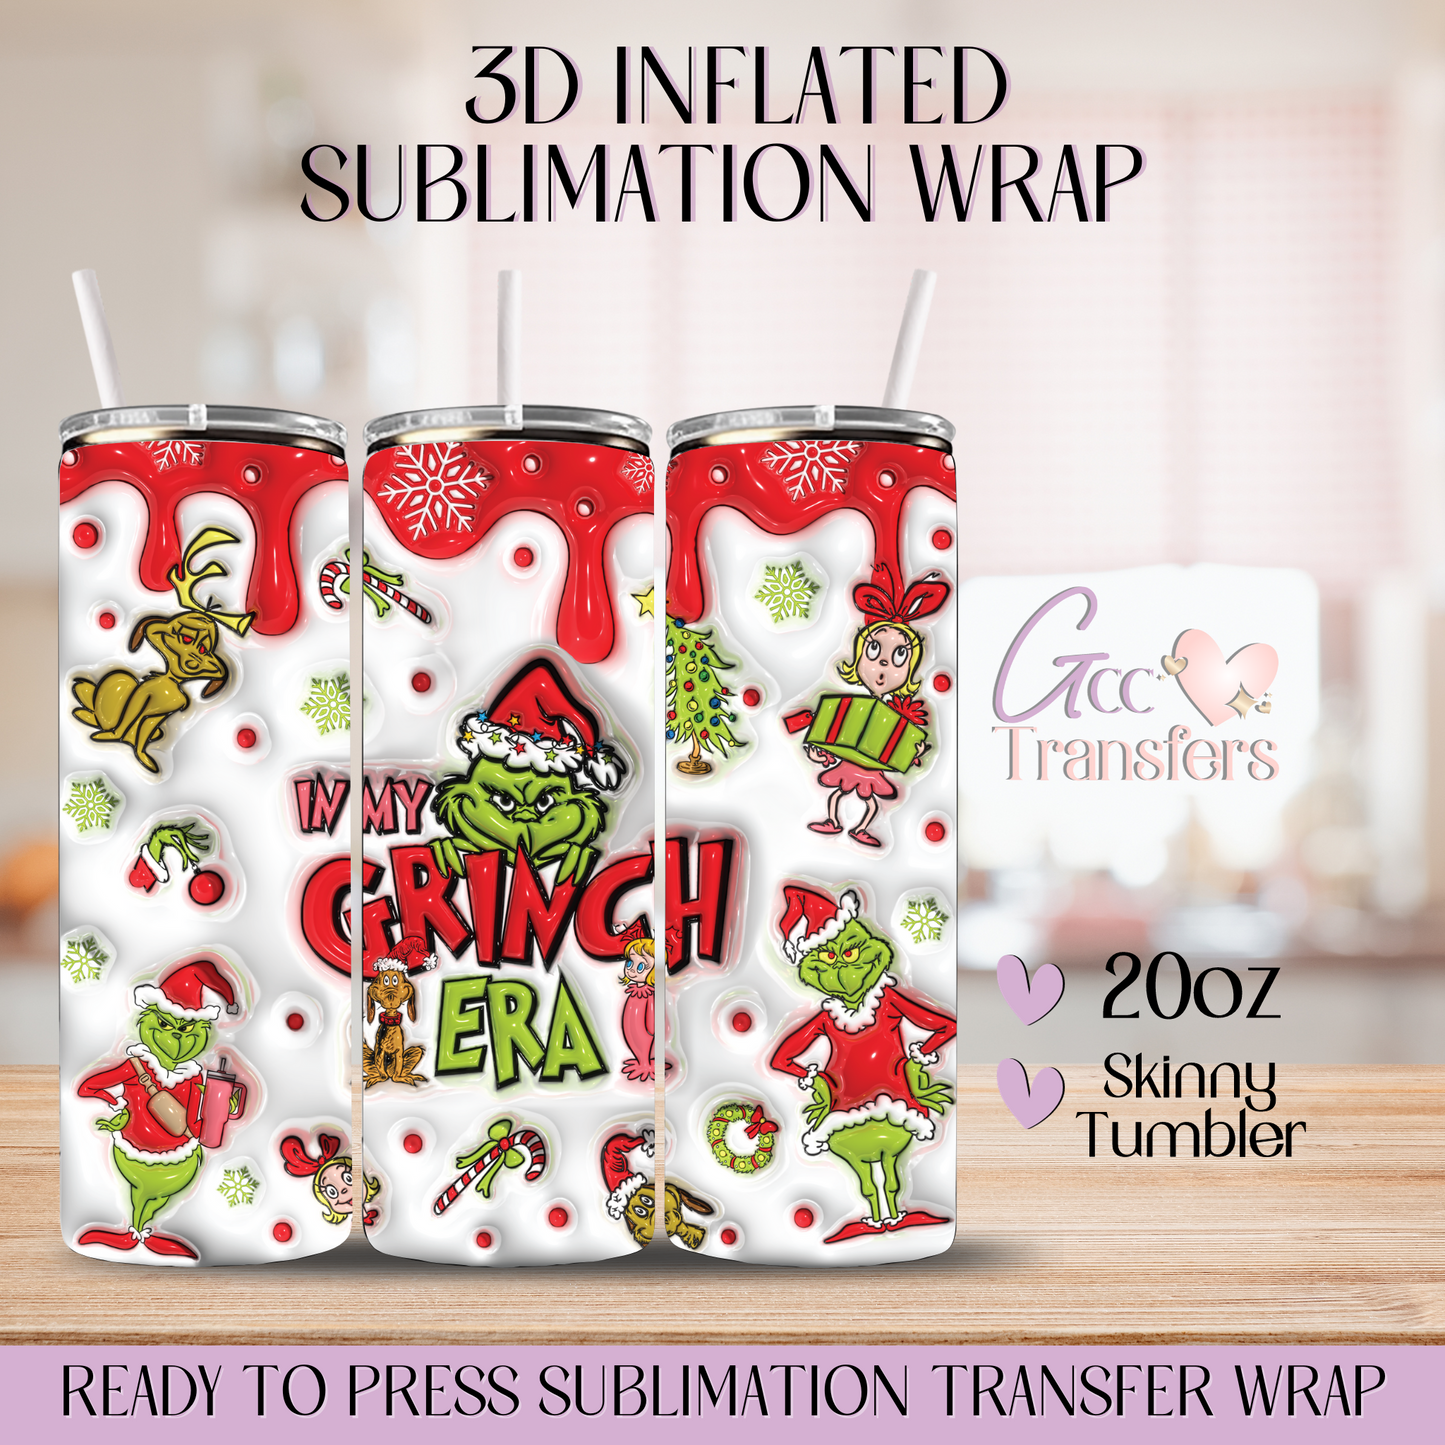 In My Grinch Era Red - 20oz 3D Inflated Sublimation Wrap